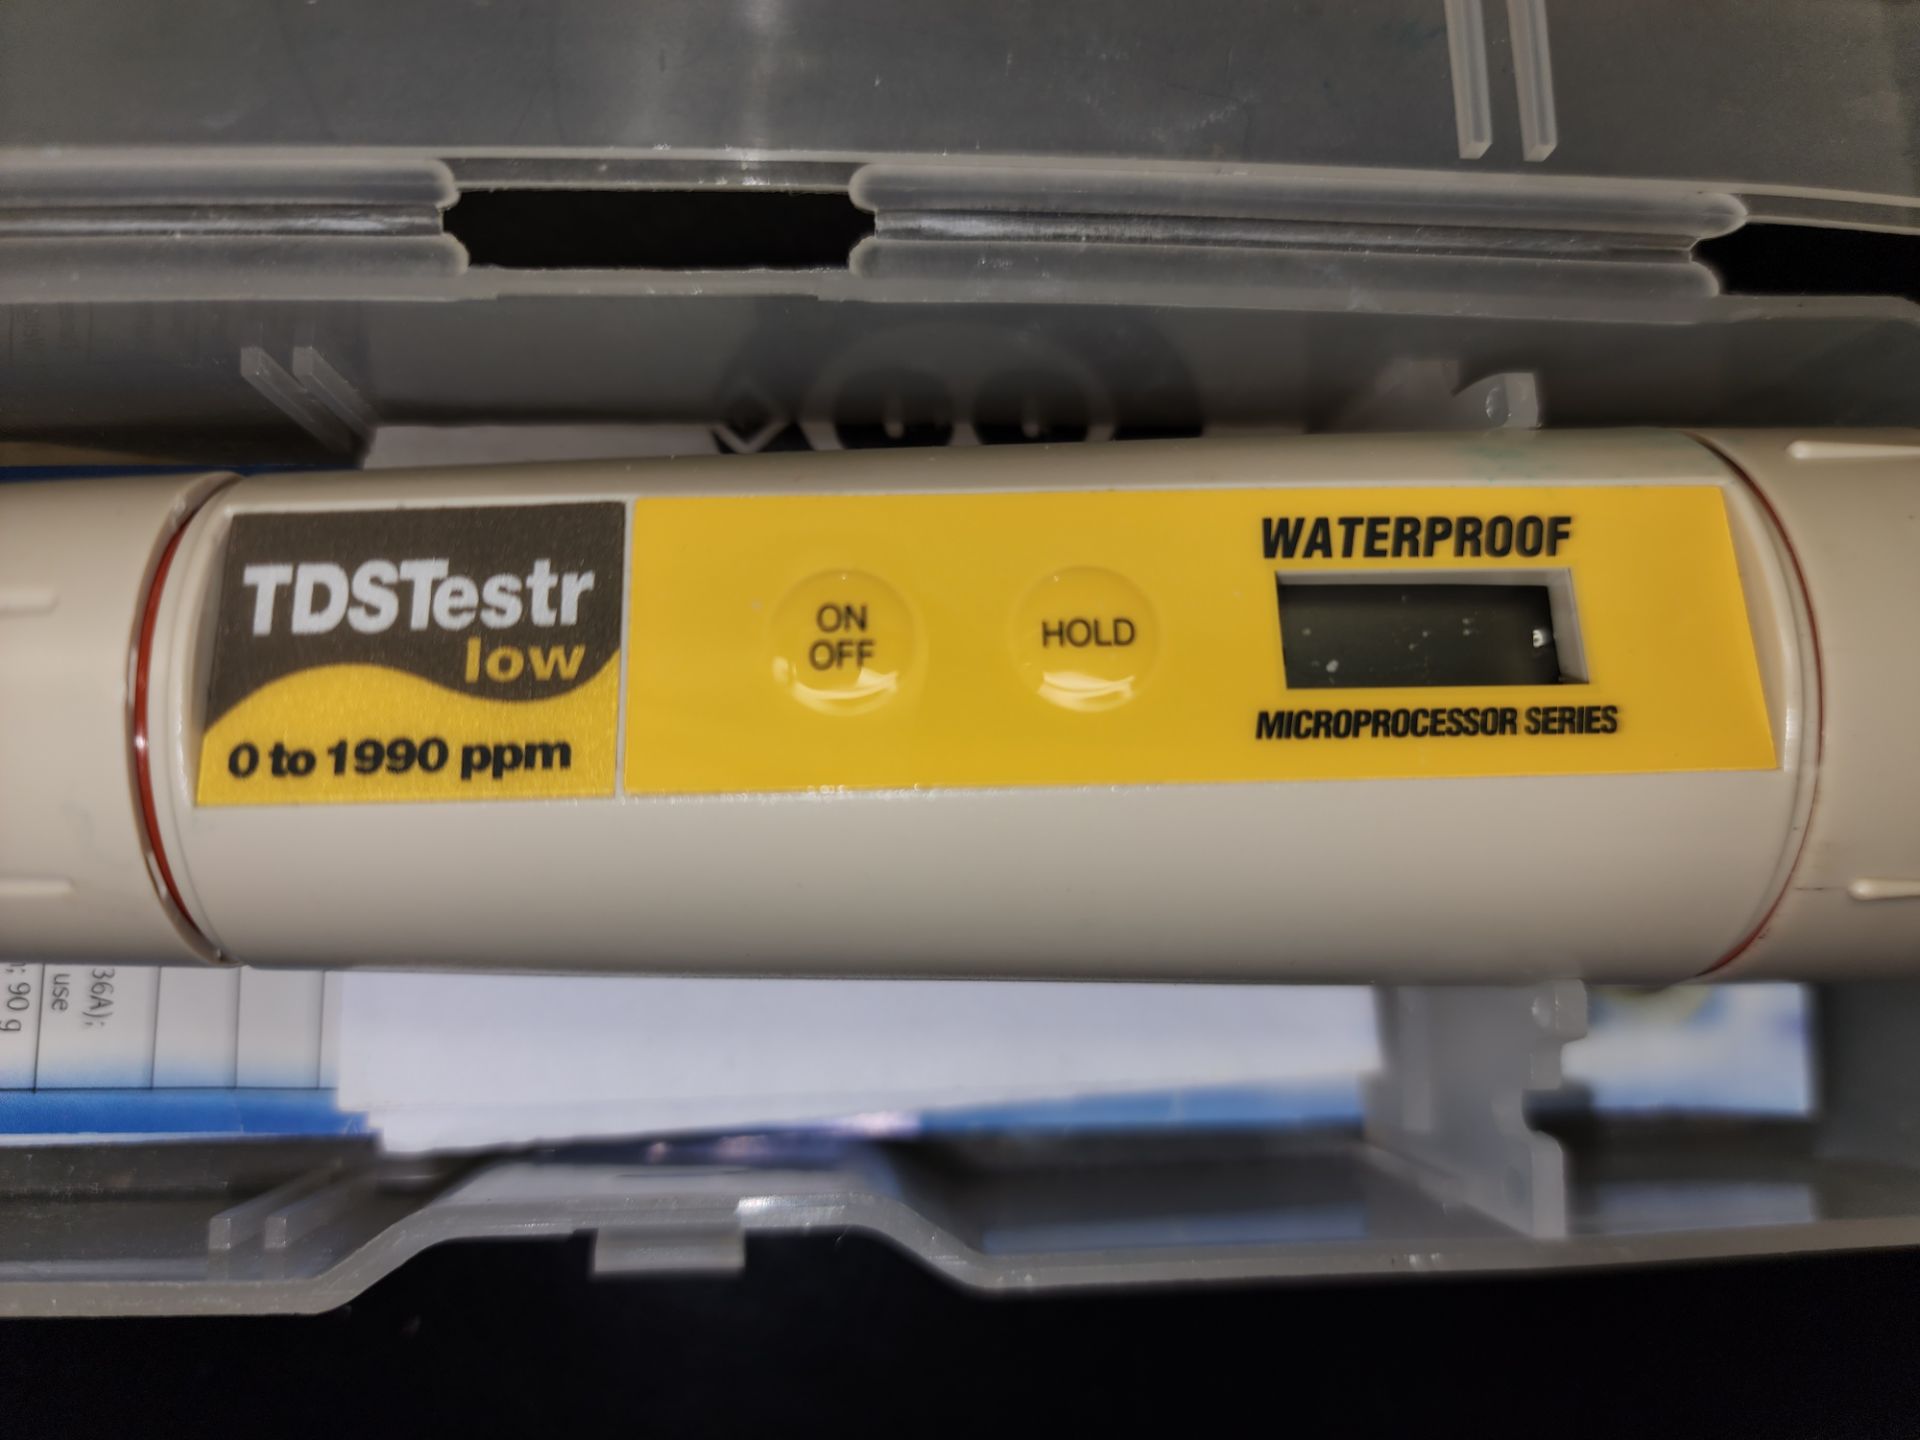 TDS Tester low - Image 2 of 4